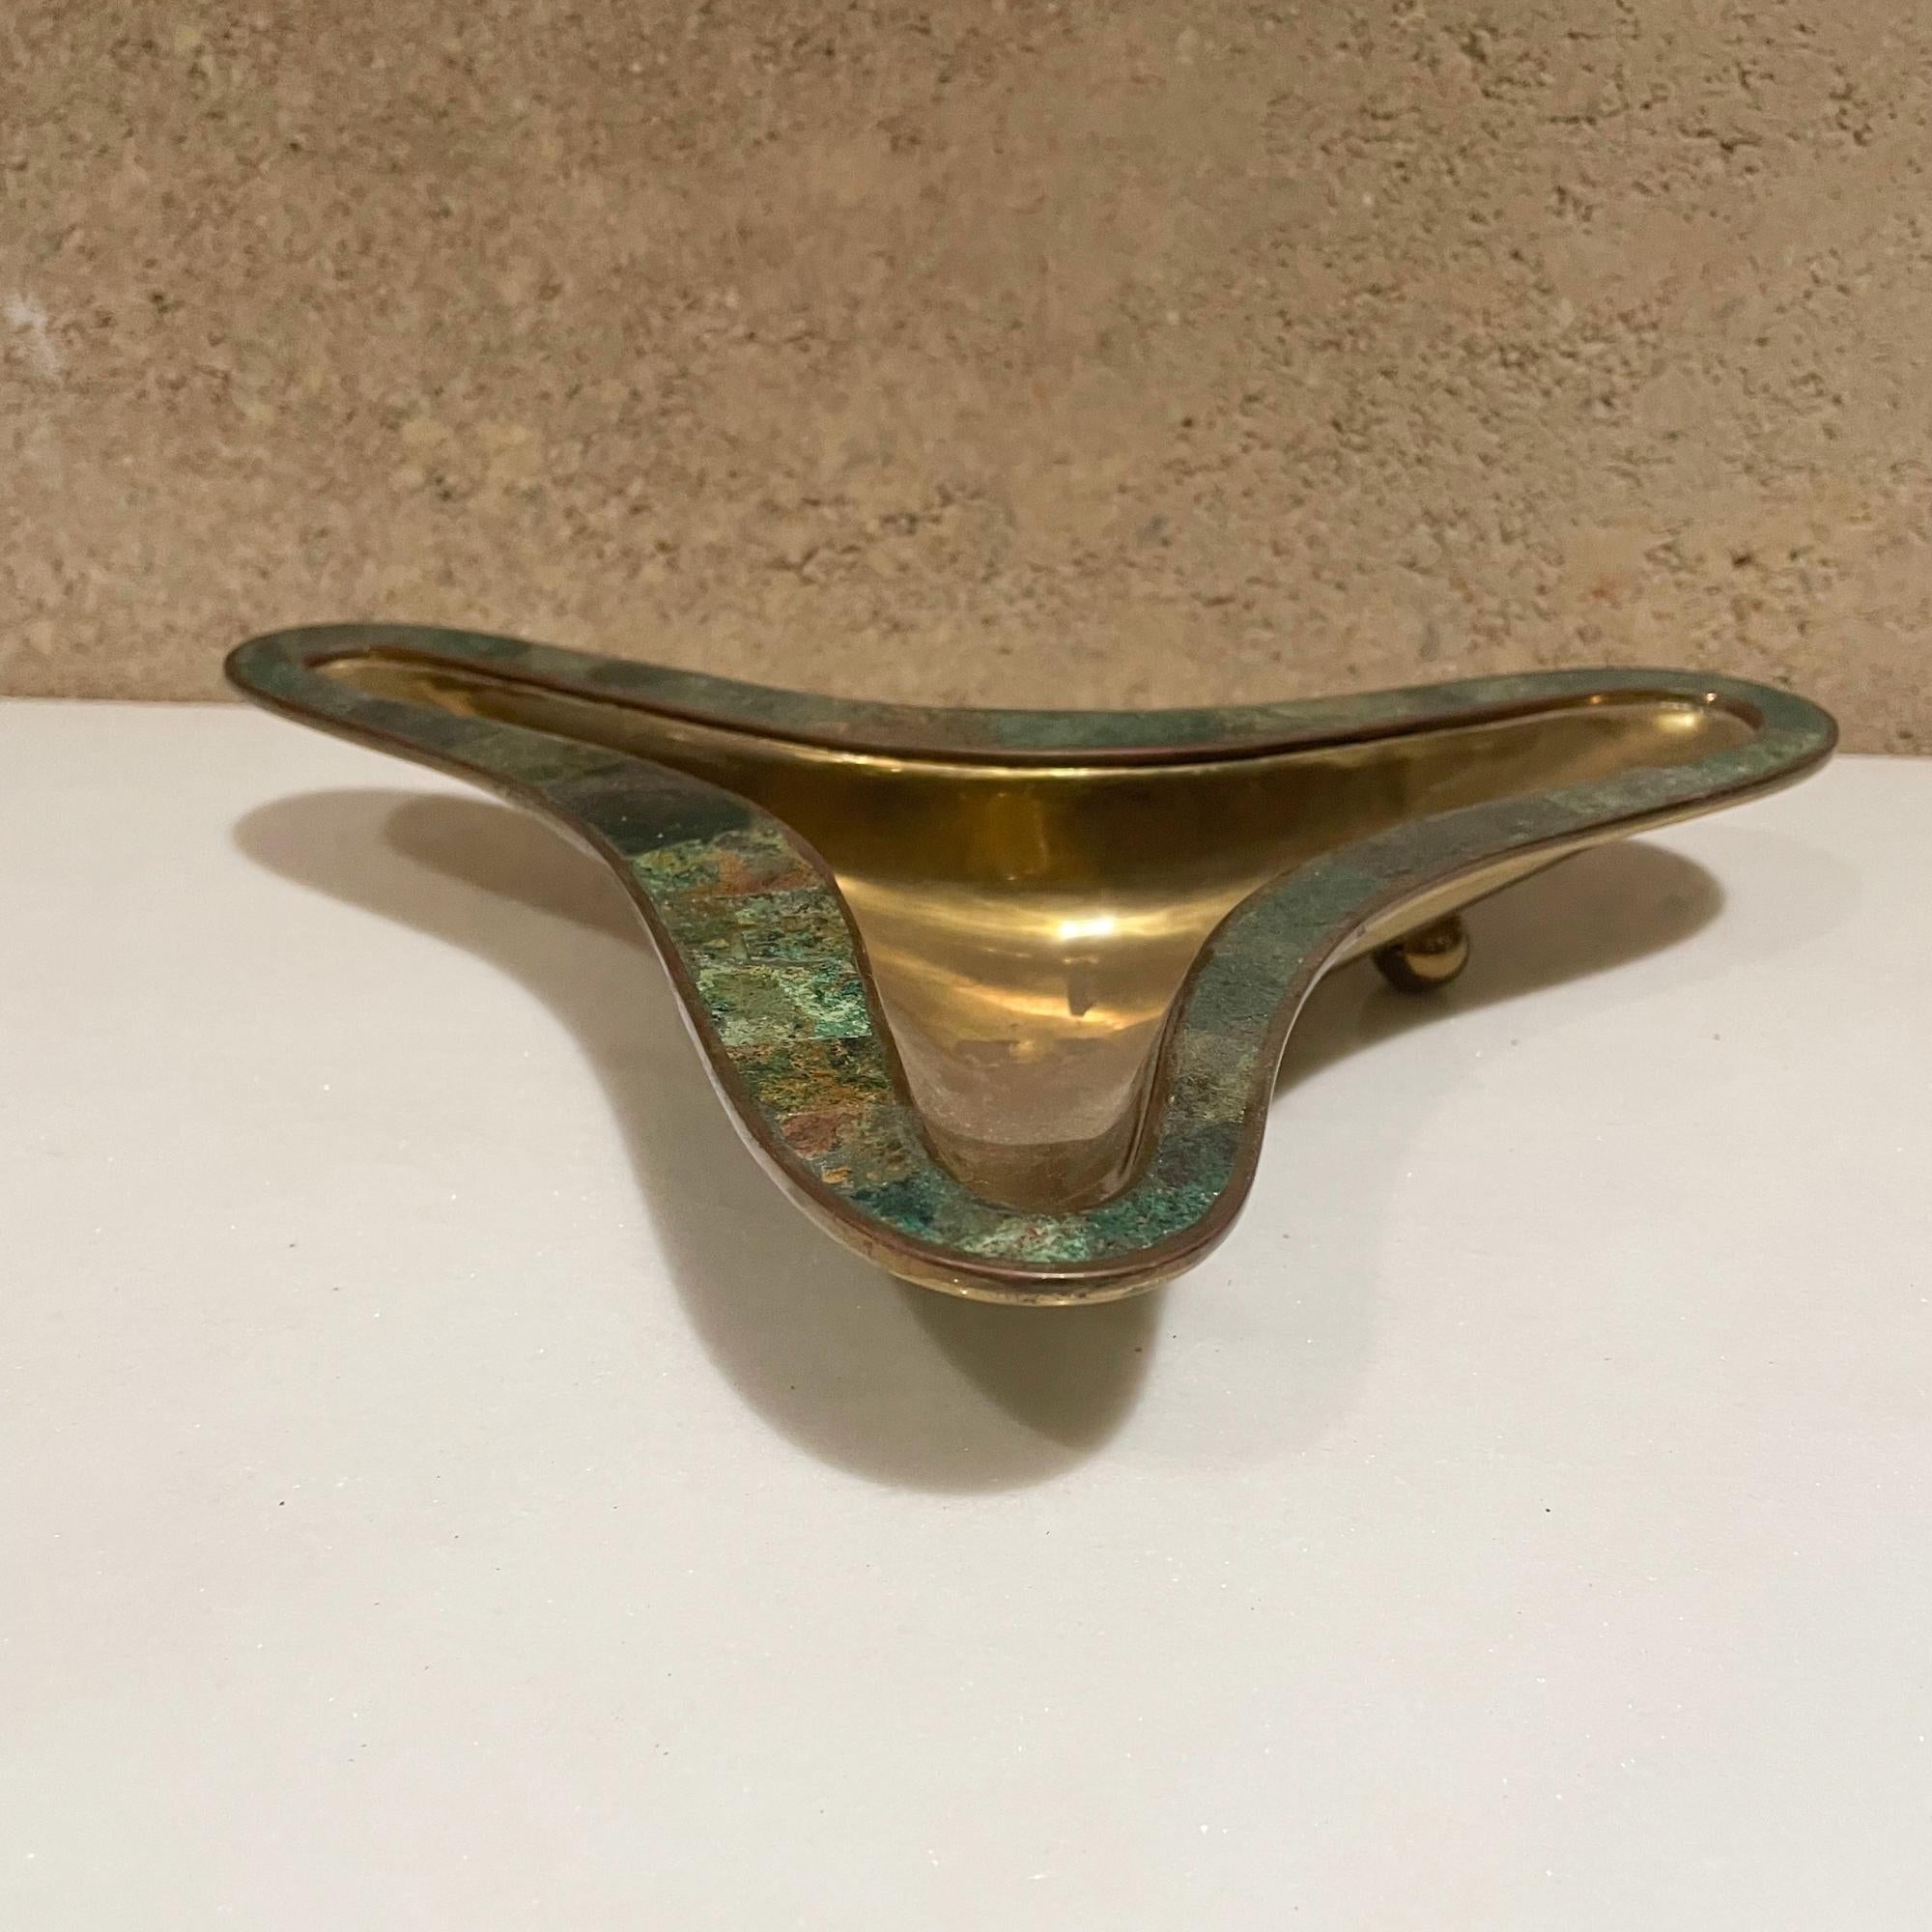 Dish
Stunning Los Castillo free form footed sculptural tripod dish in Mexican Brass & beautiful Malachite trim. 1950s Mexico.
Measures: 10.13 W x 7.38 D x 1.5 H inches
Maker stamped
Preowned unrestored original vintage condition.
Review images.